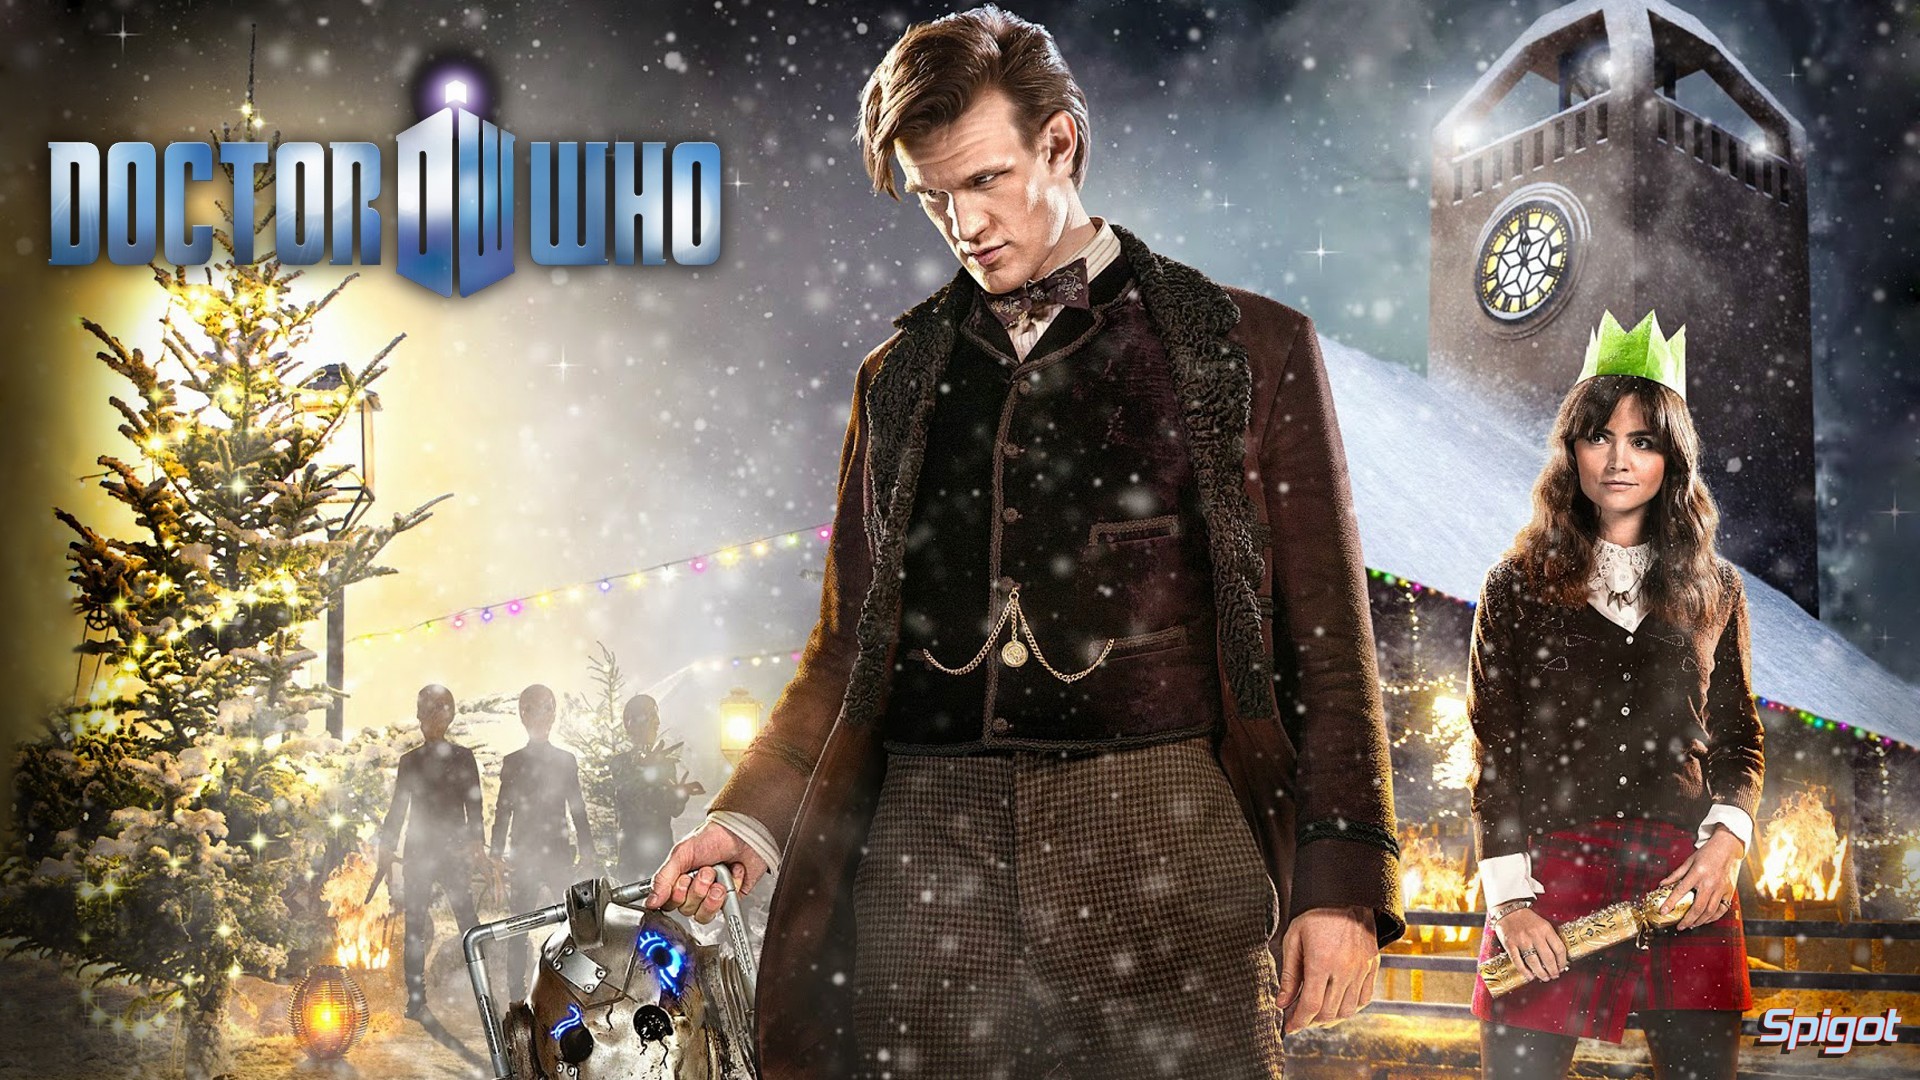 1920x1080 The Doctor, Doctor Who, Matt Smith, The Time Of The Doctor, Jenna Coleman,  Clara Oswald, Eleventh Doctor Wallpapers HD / Desktop and Mobile Backgrounds